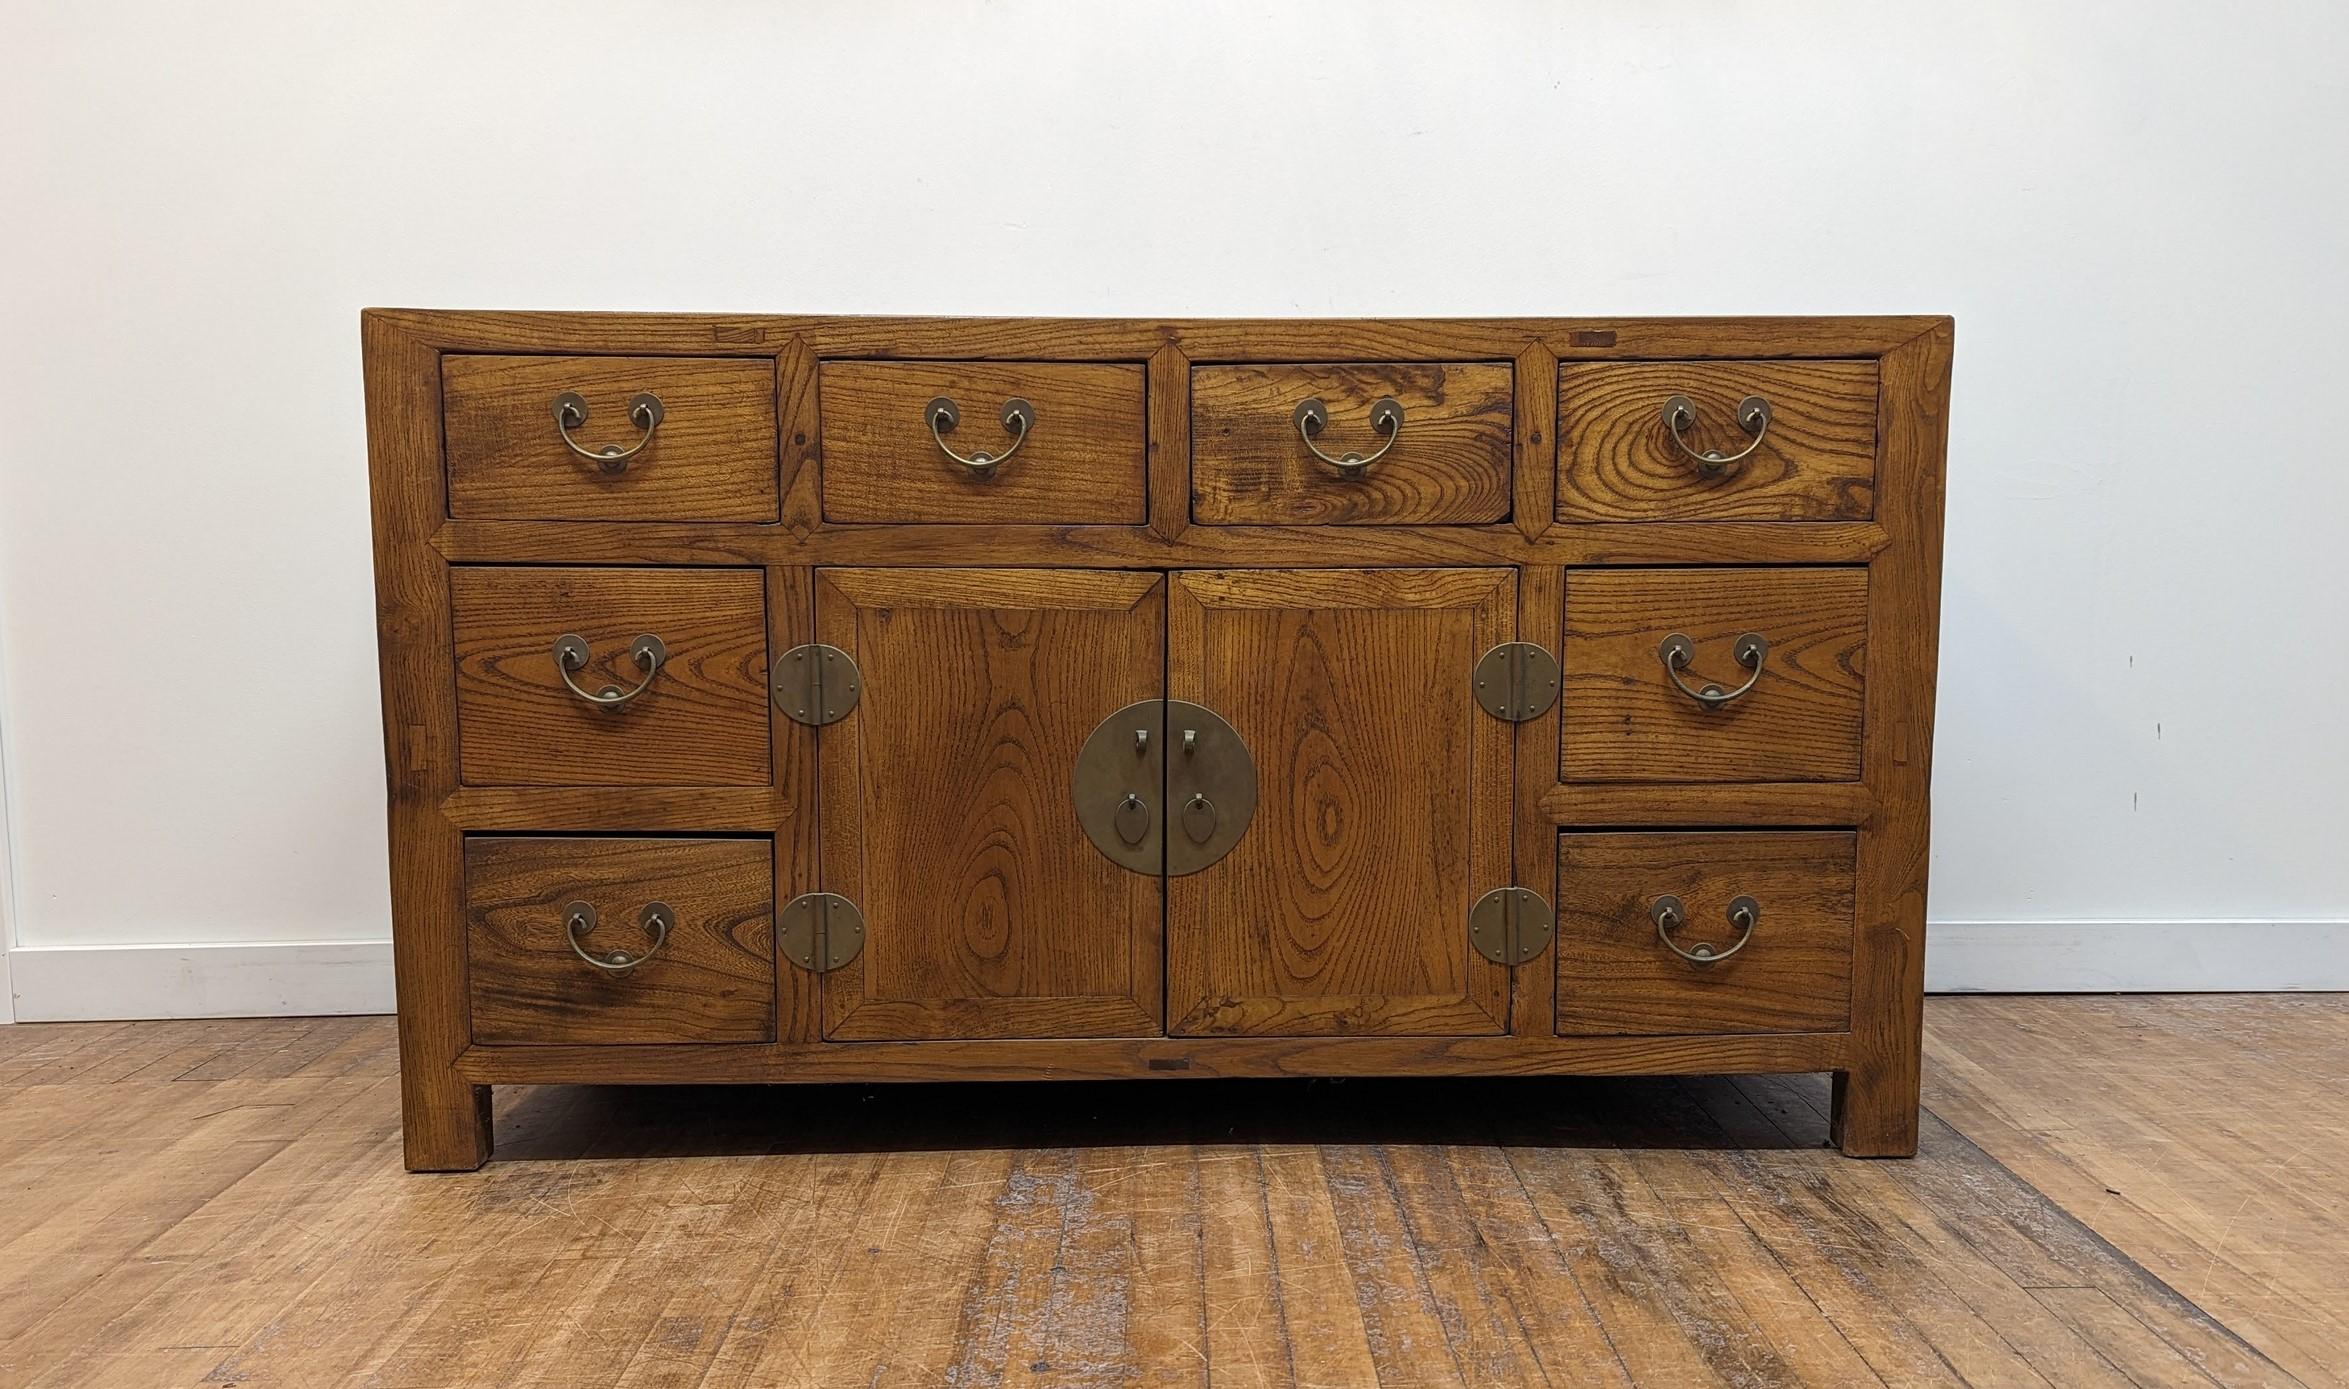 Antique Sideboard of Elm Wood.  Antique Chinese Sideboard.  Early 20th century eight drawer sideboard with cabinet storage in the middle.  Warm colored rich Elm wood has a very natural sensibility.  The drawers and cabinet shelves are as deep as the